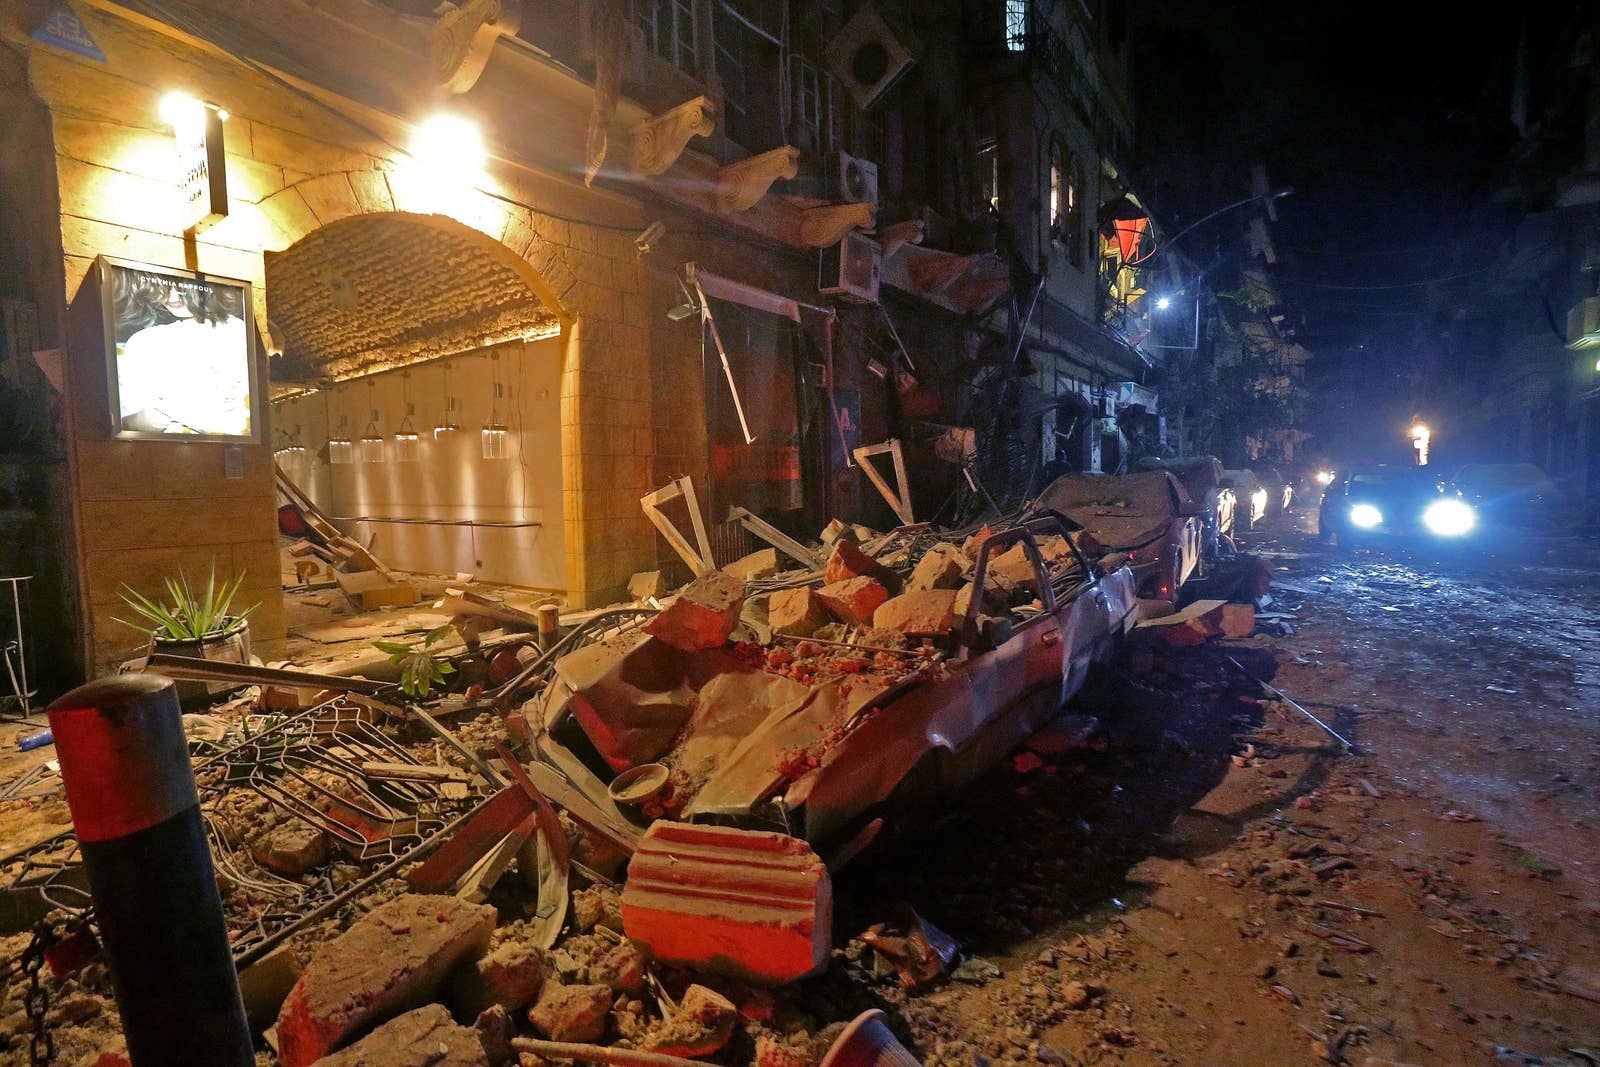 Cars are buried in rubble and buildings destroyed on a street at night